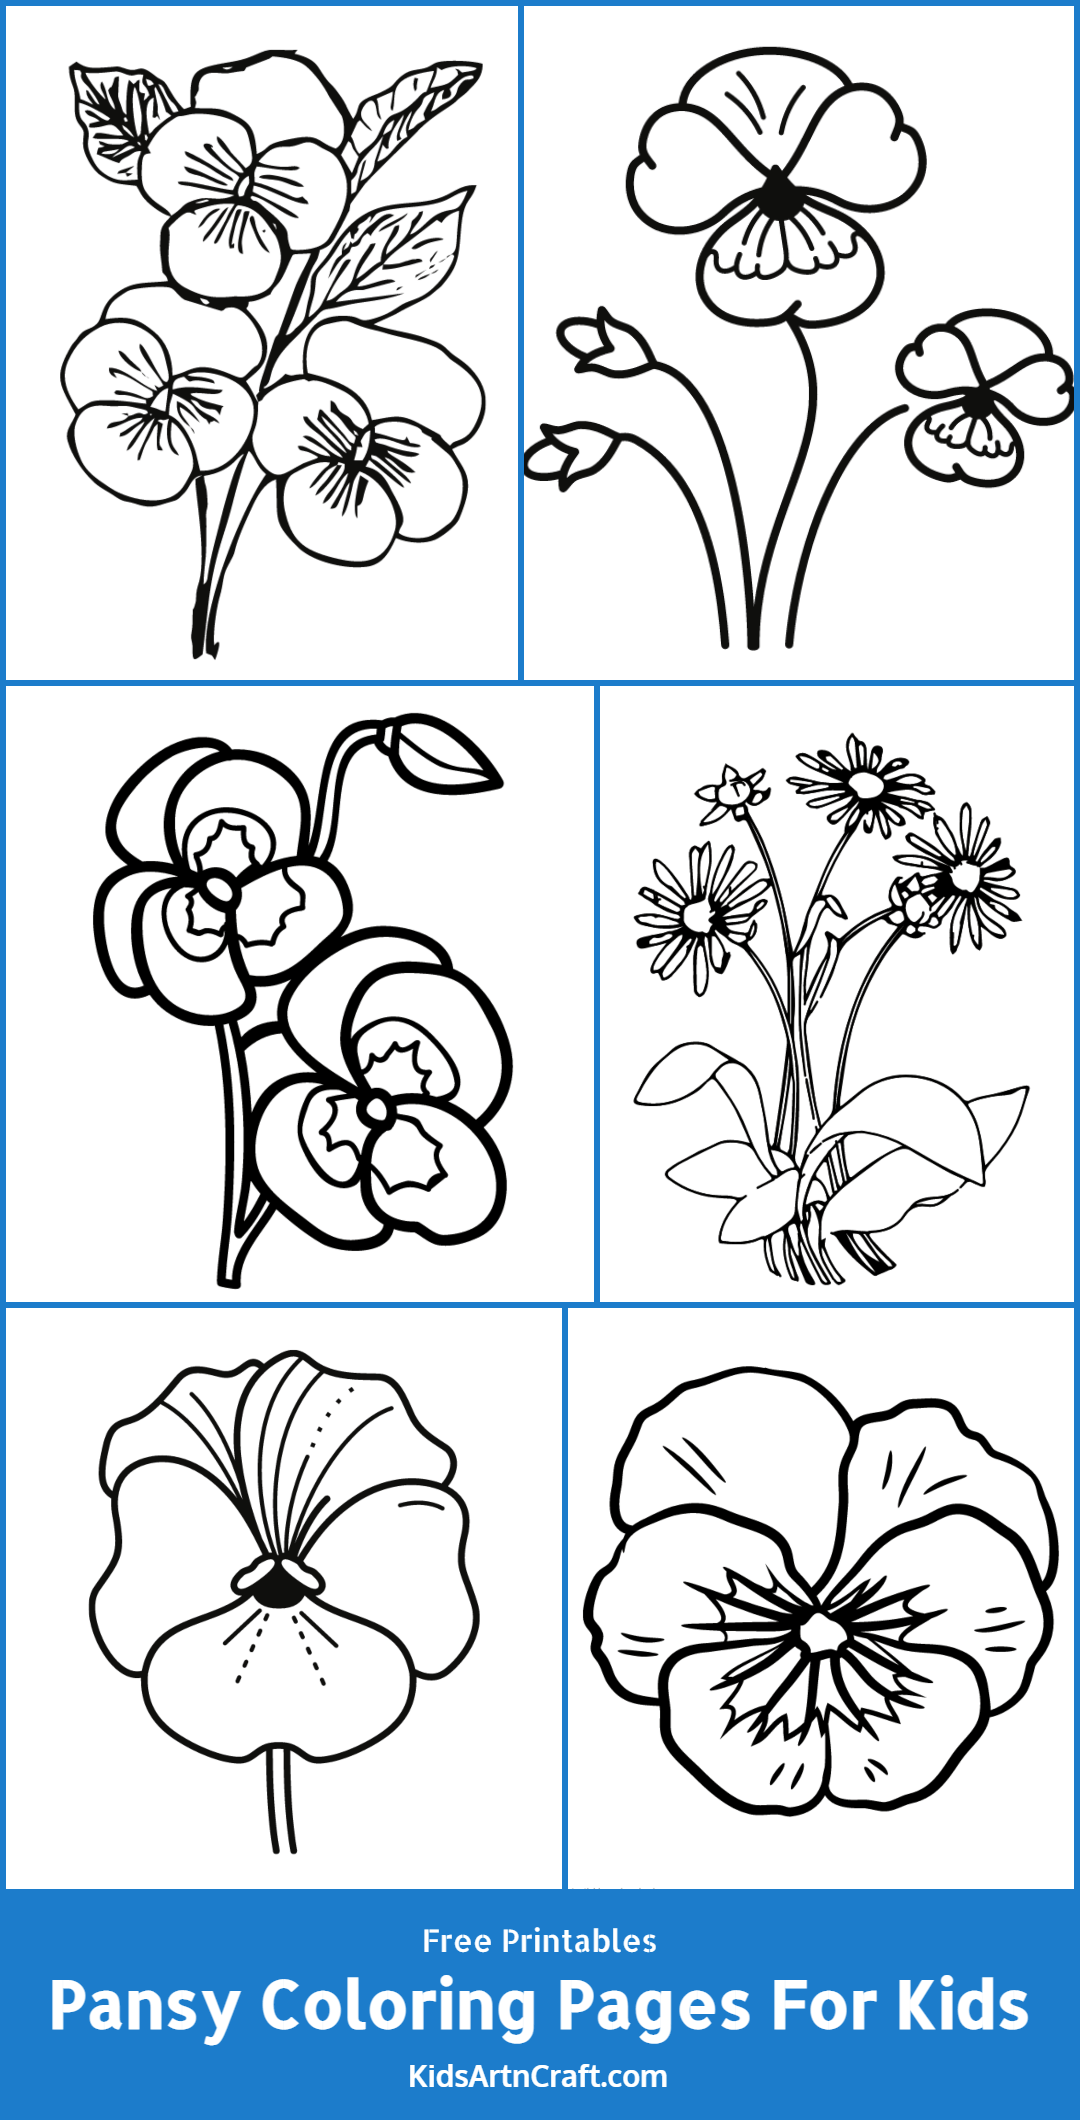 Pansy Coloring Pages For Kids – Free Printables